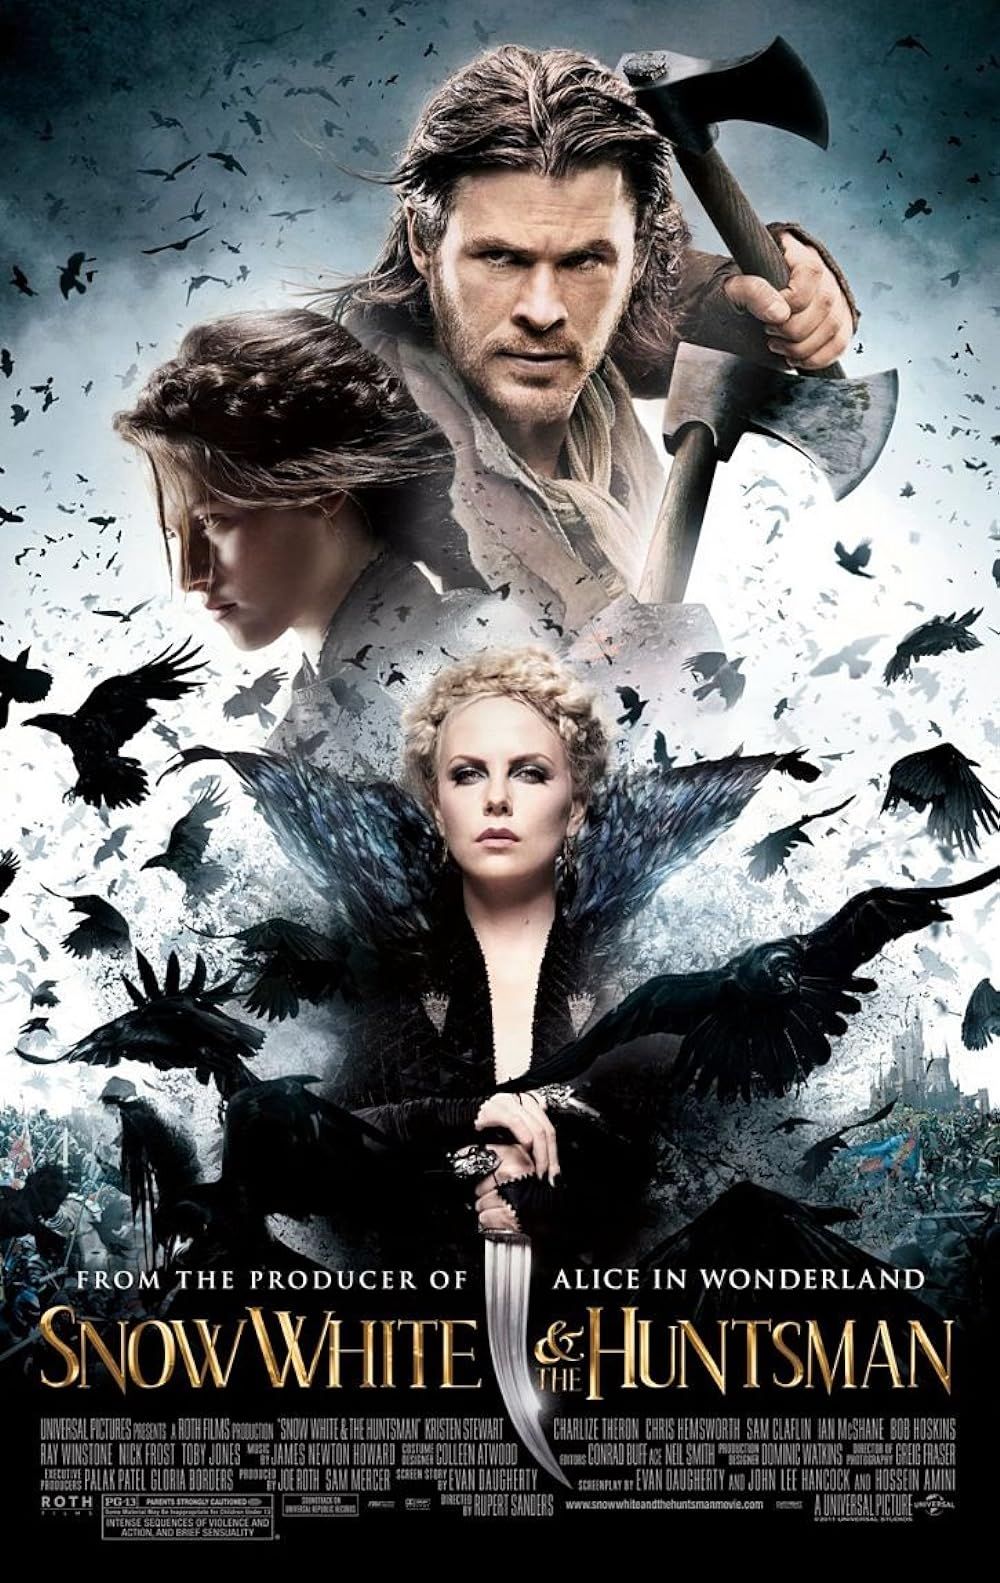 Chris Hemsworth, Kristen Stewart and Charlize Theron with Ravens on the Snow White and the Huntsman Poster